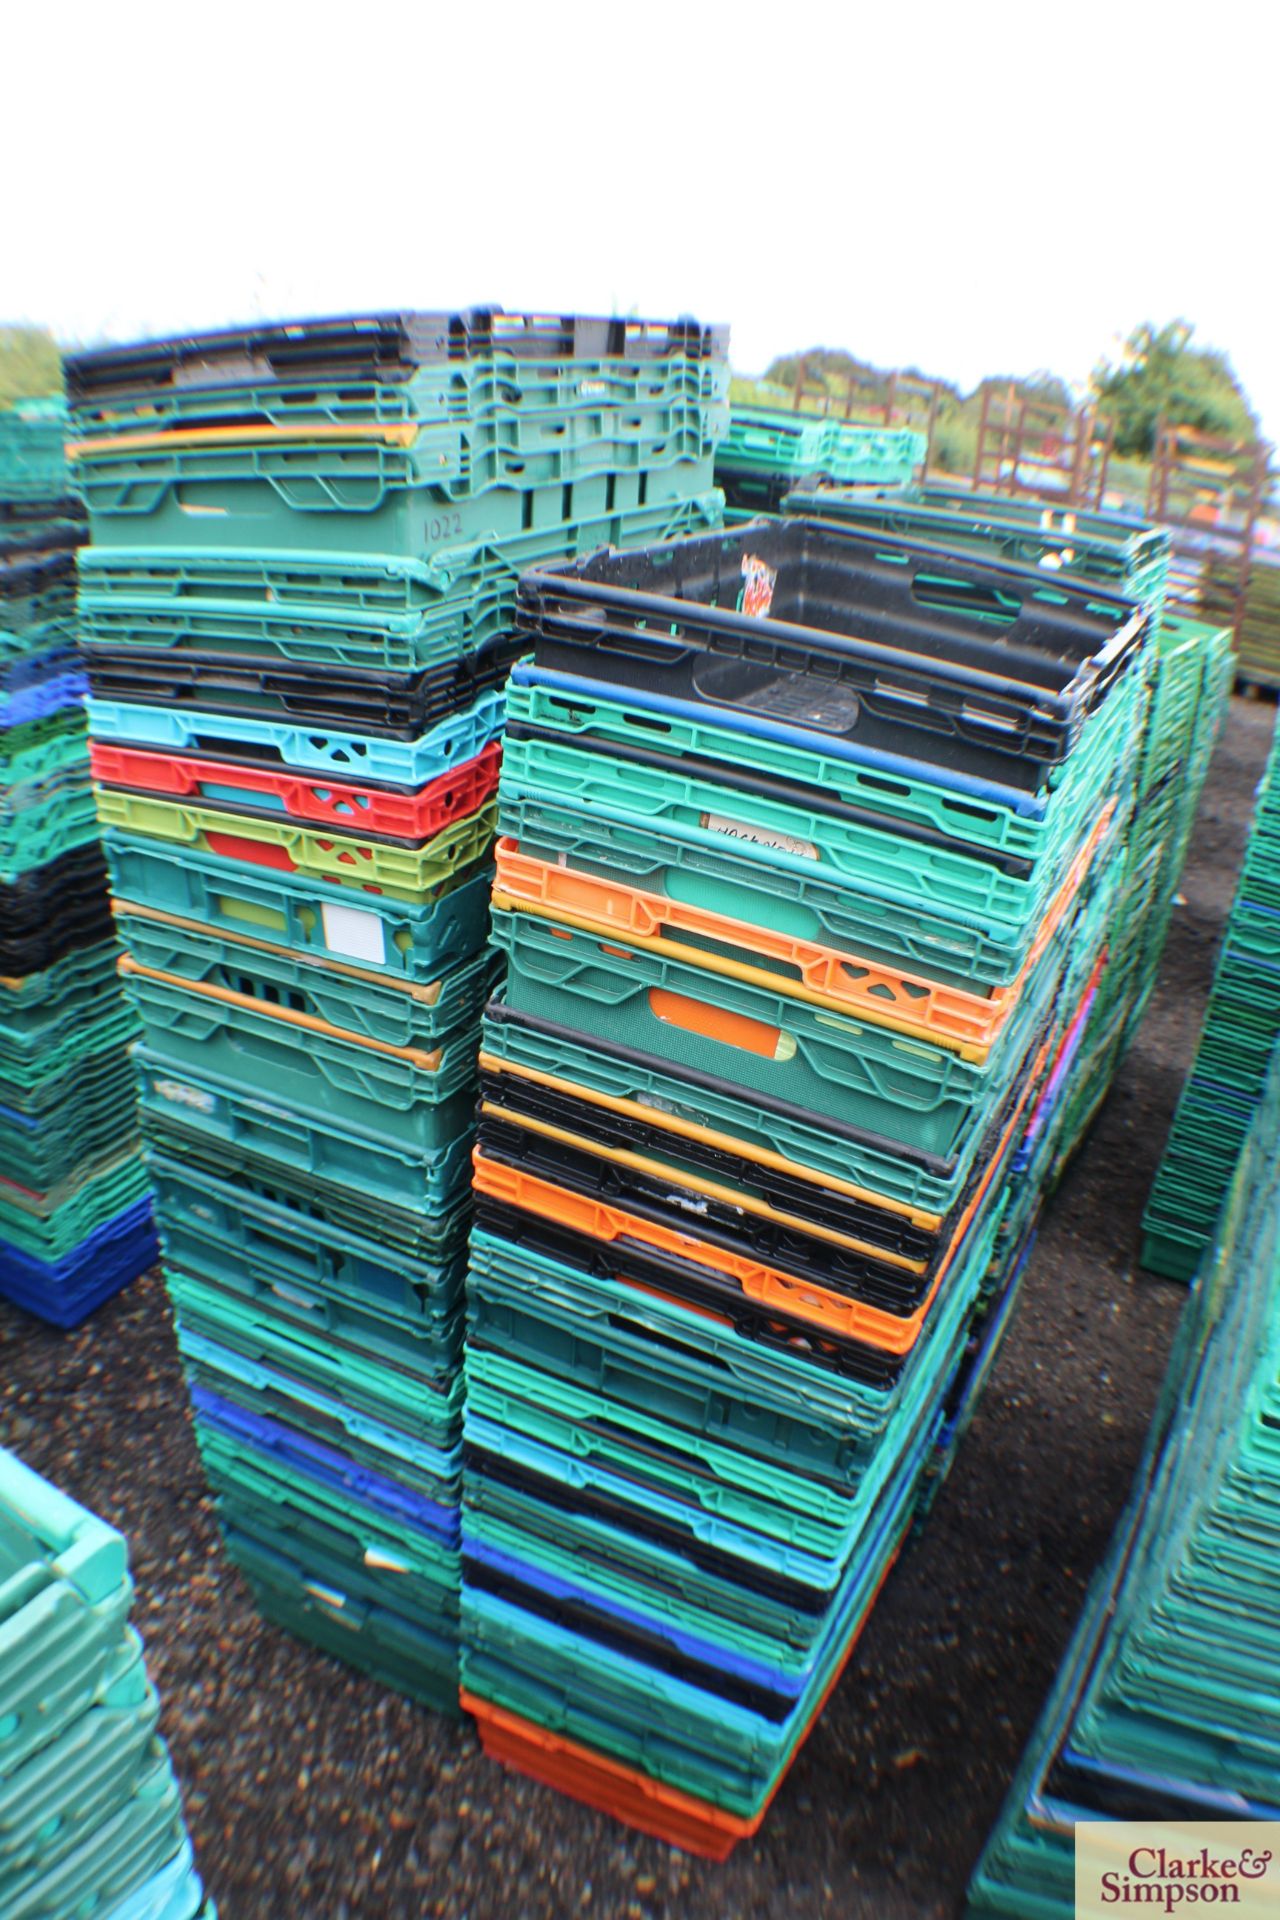 100x vegetable/ produce stacking crates.